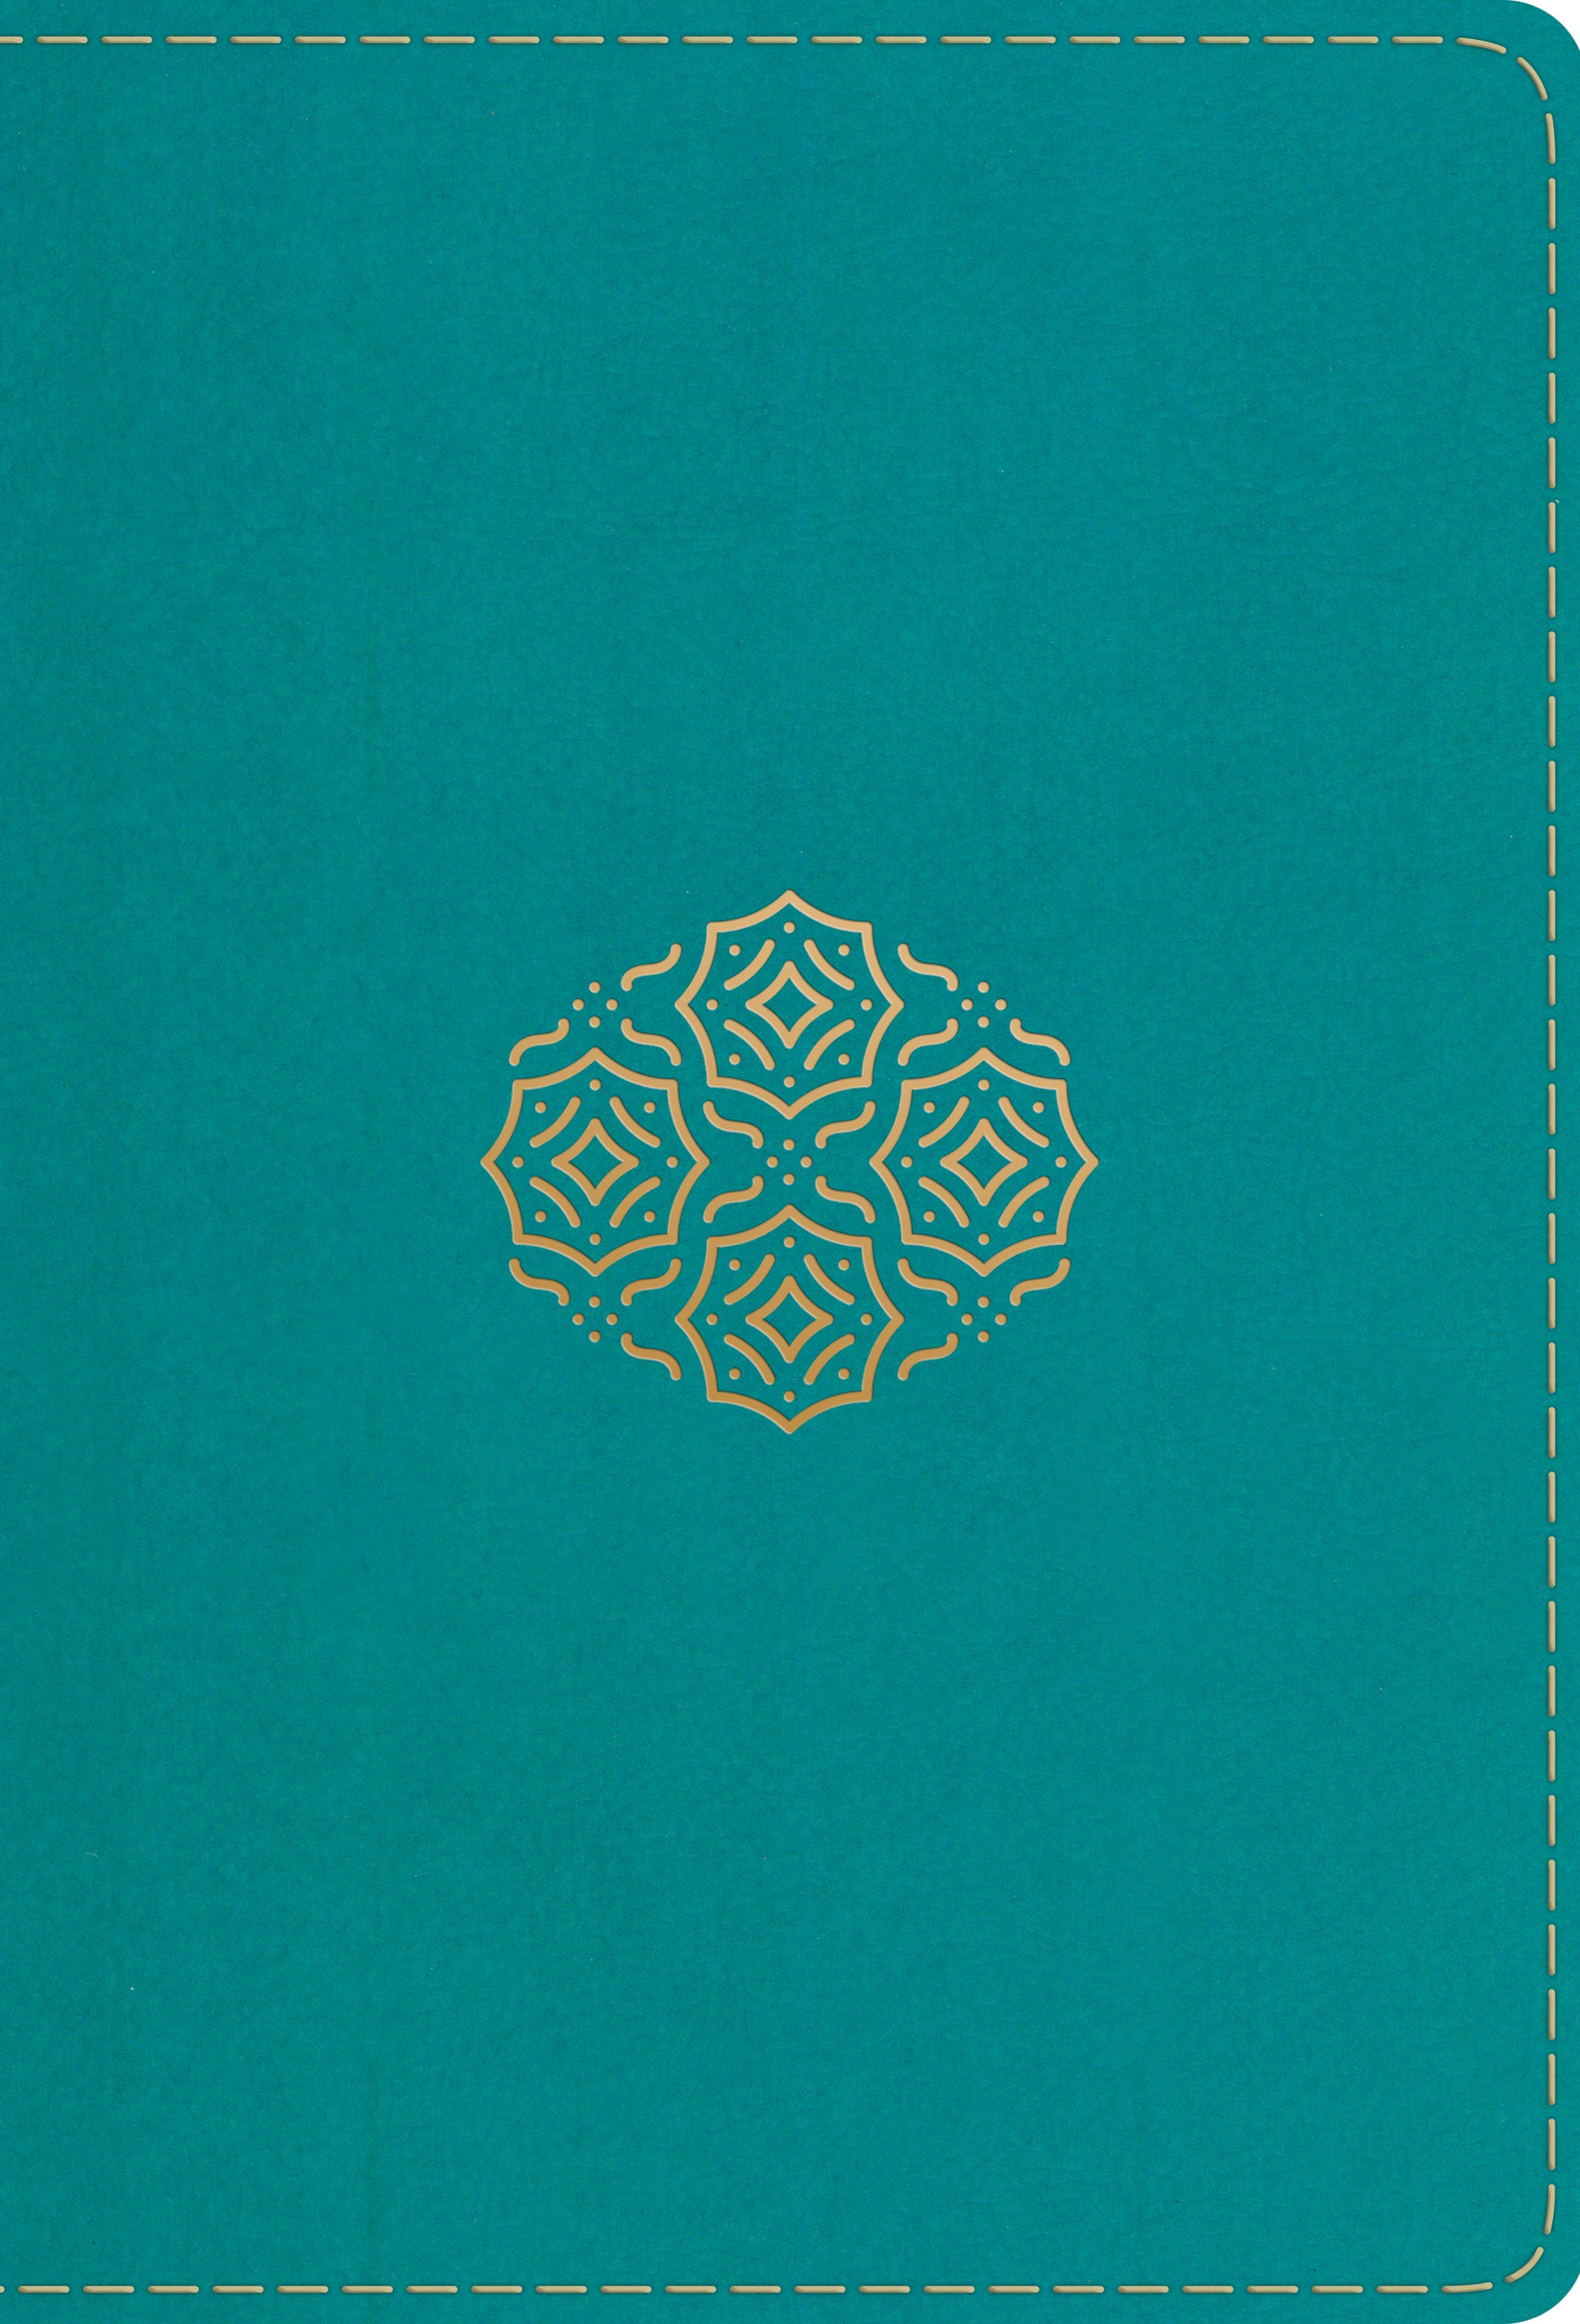 Image of ESV Large Print Compact Bible, Teal, Imitation Leather, Gilt-Edged, Double-Column, Words Of Christ In Red, Ribbon Marker, Concordance, Bouquet Design, Smyth-Sewn Binding other